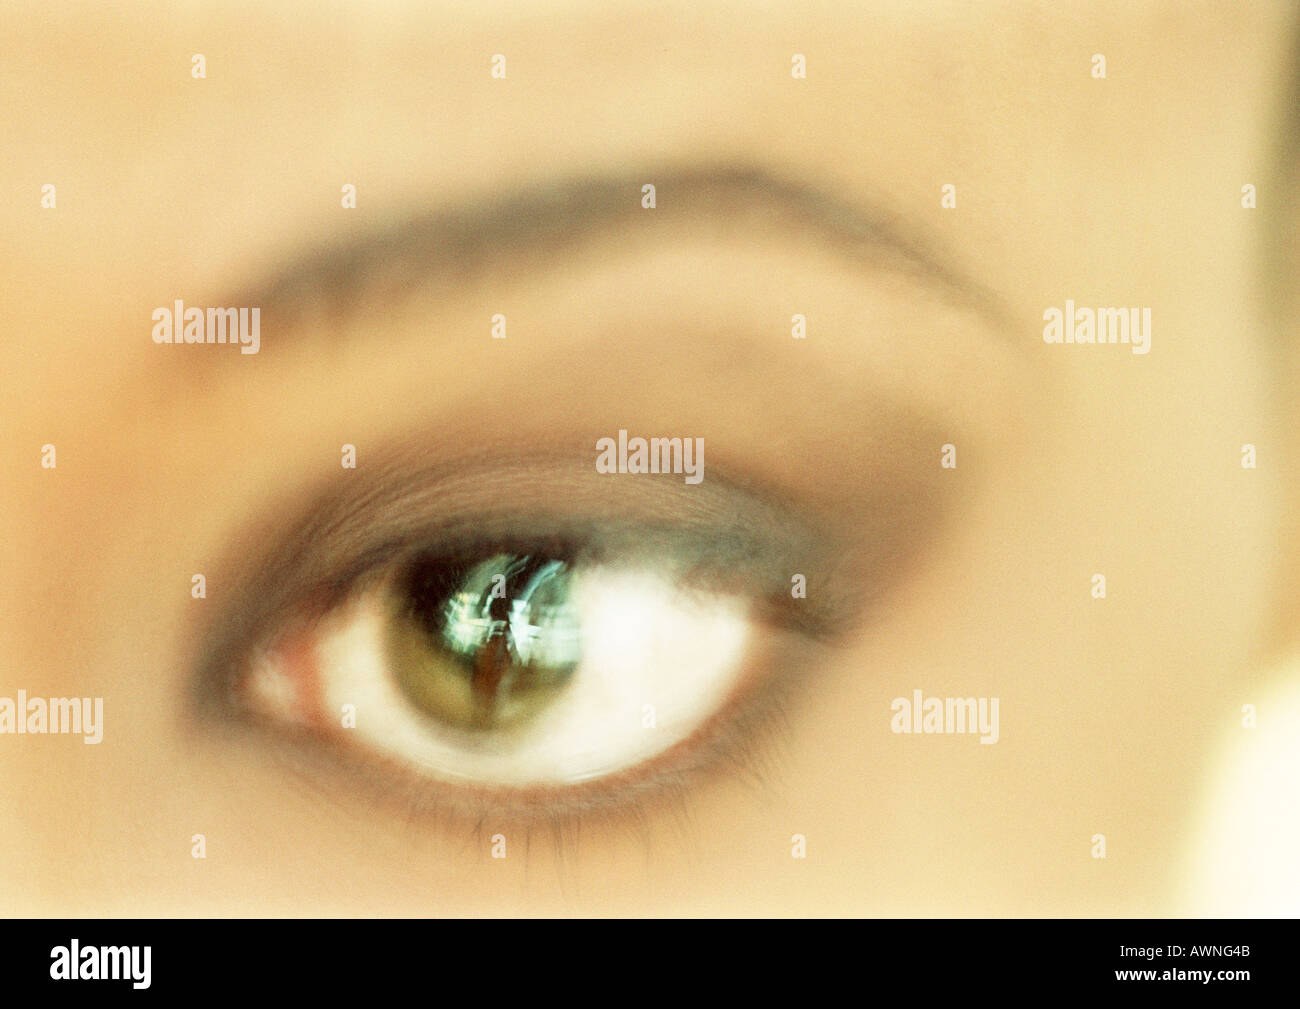 Woman's brown eye looking away from camera, blurred close up. Stock Photo